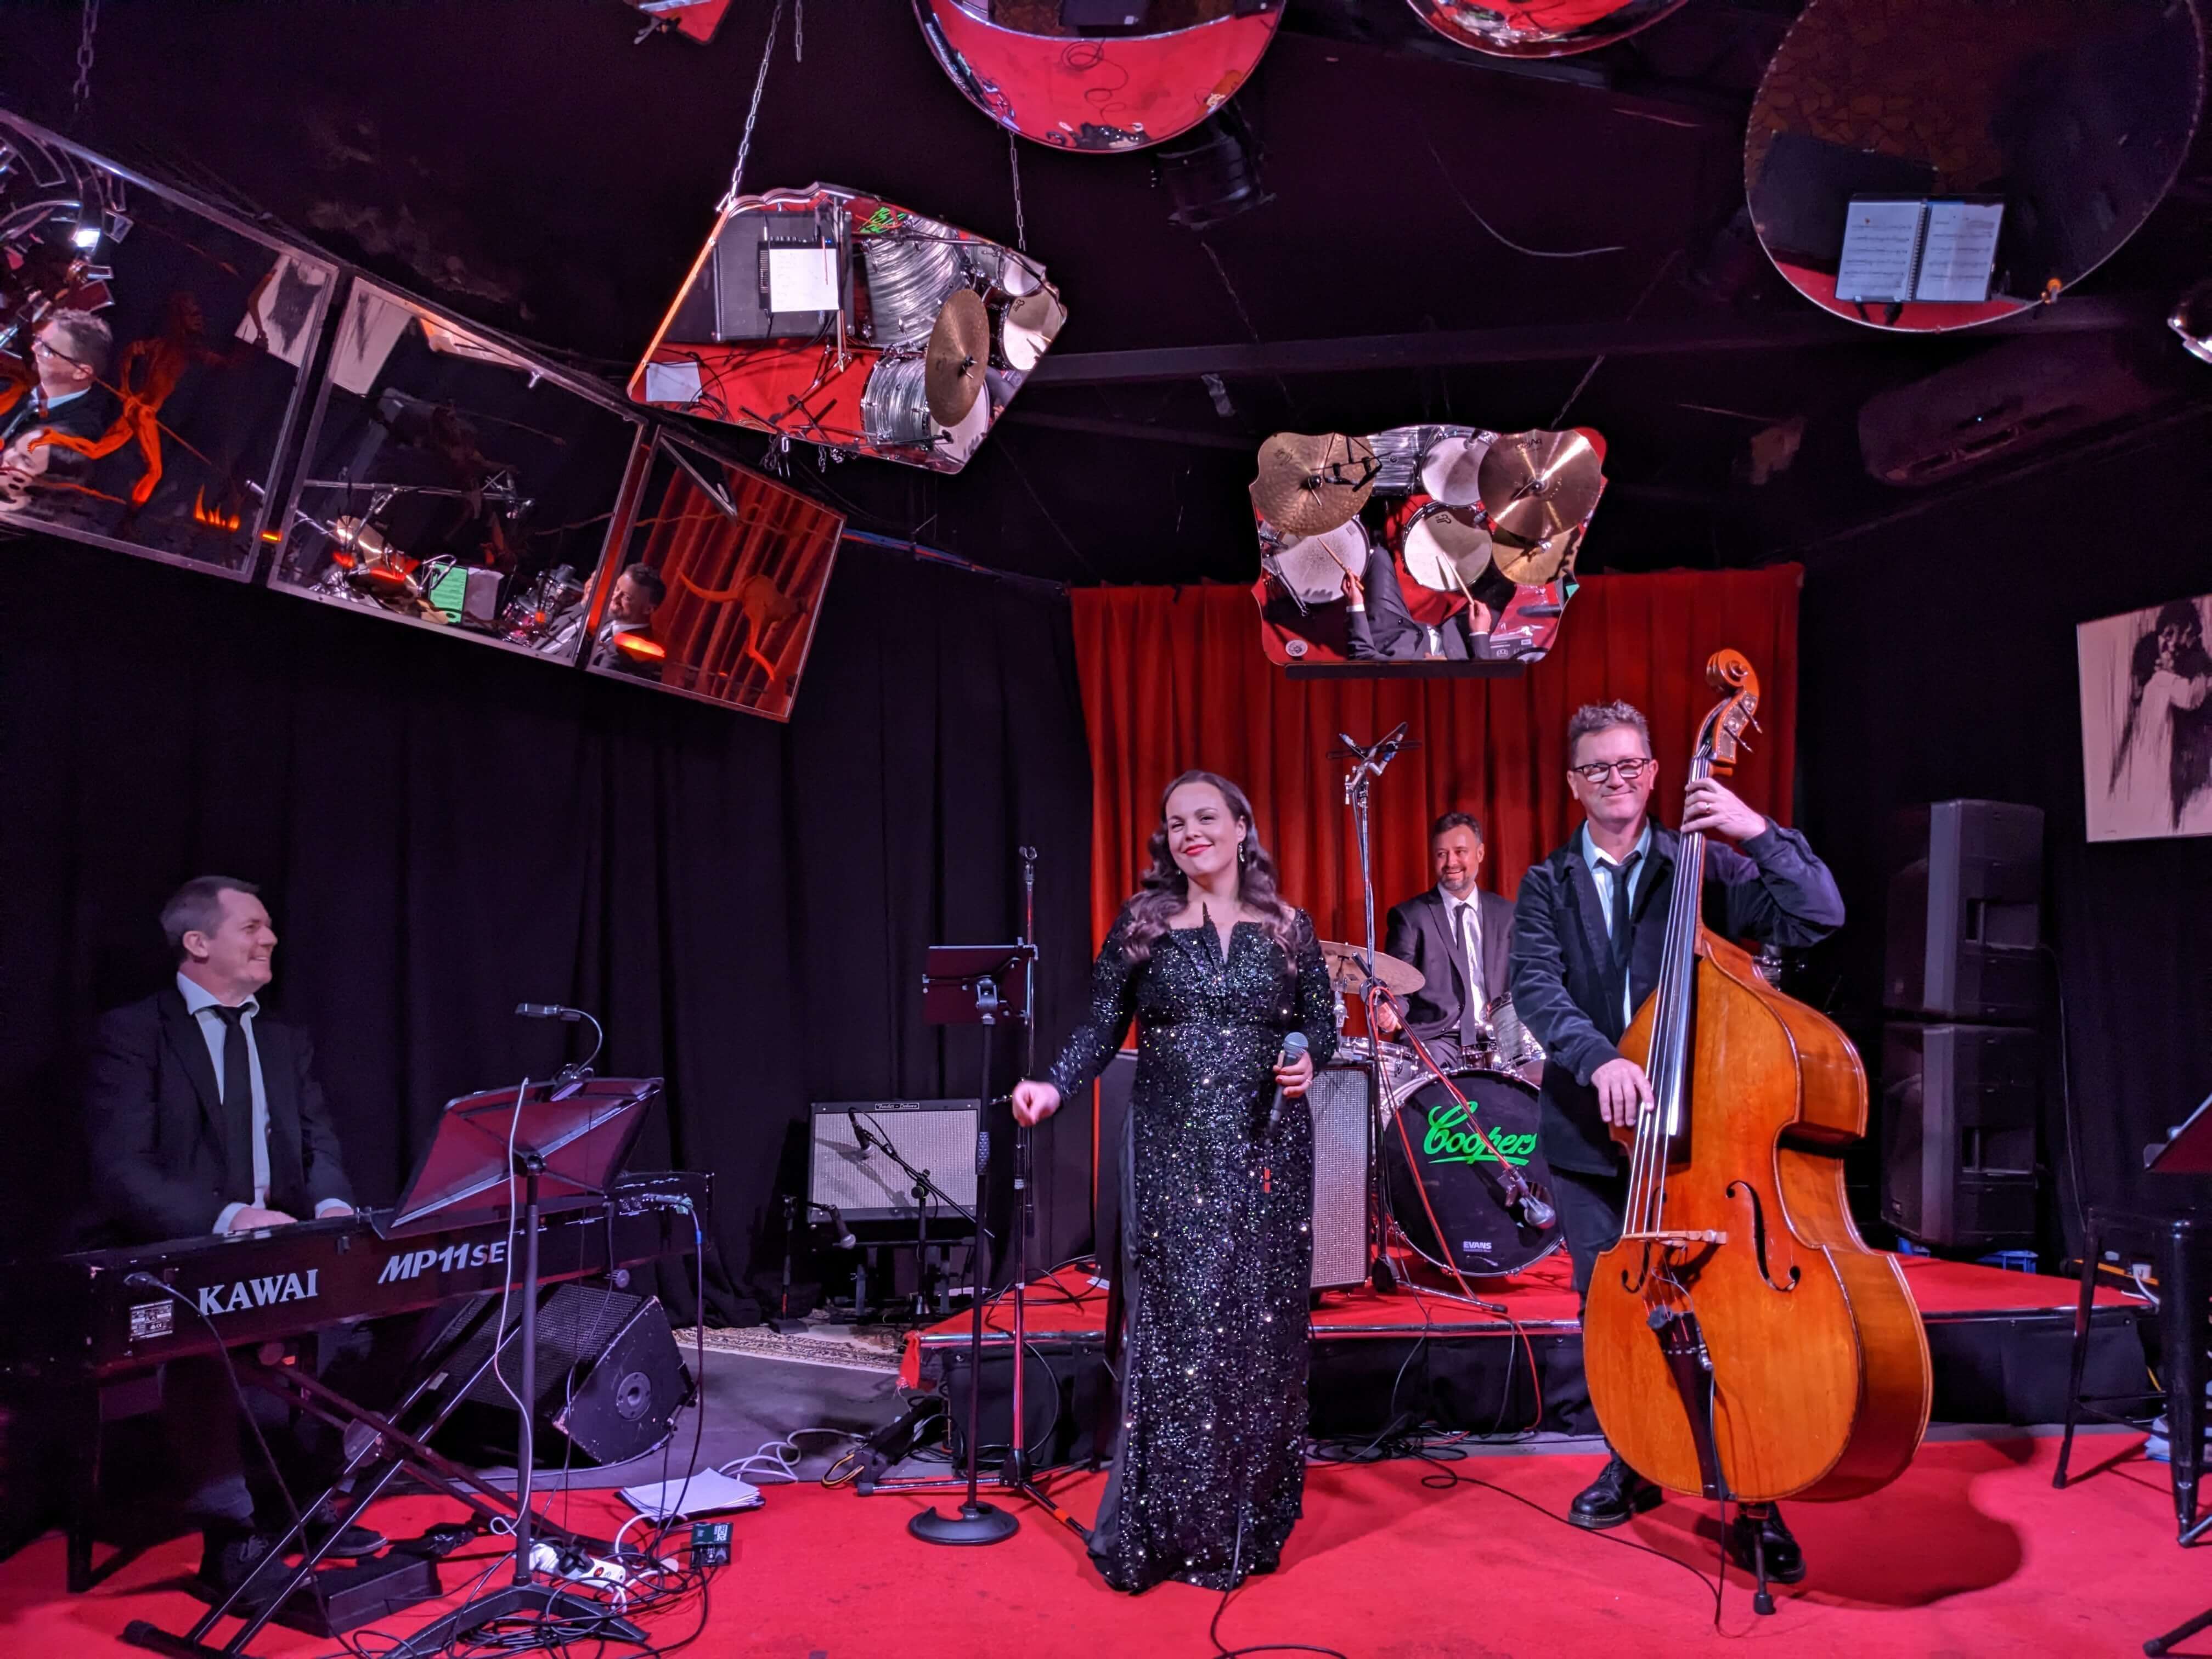 Jazz players in a red and purple room